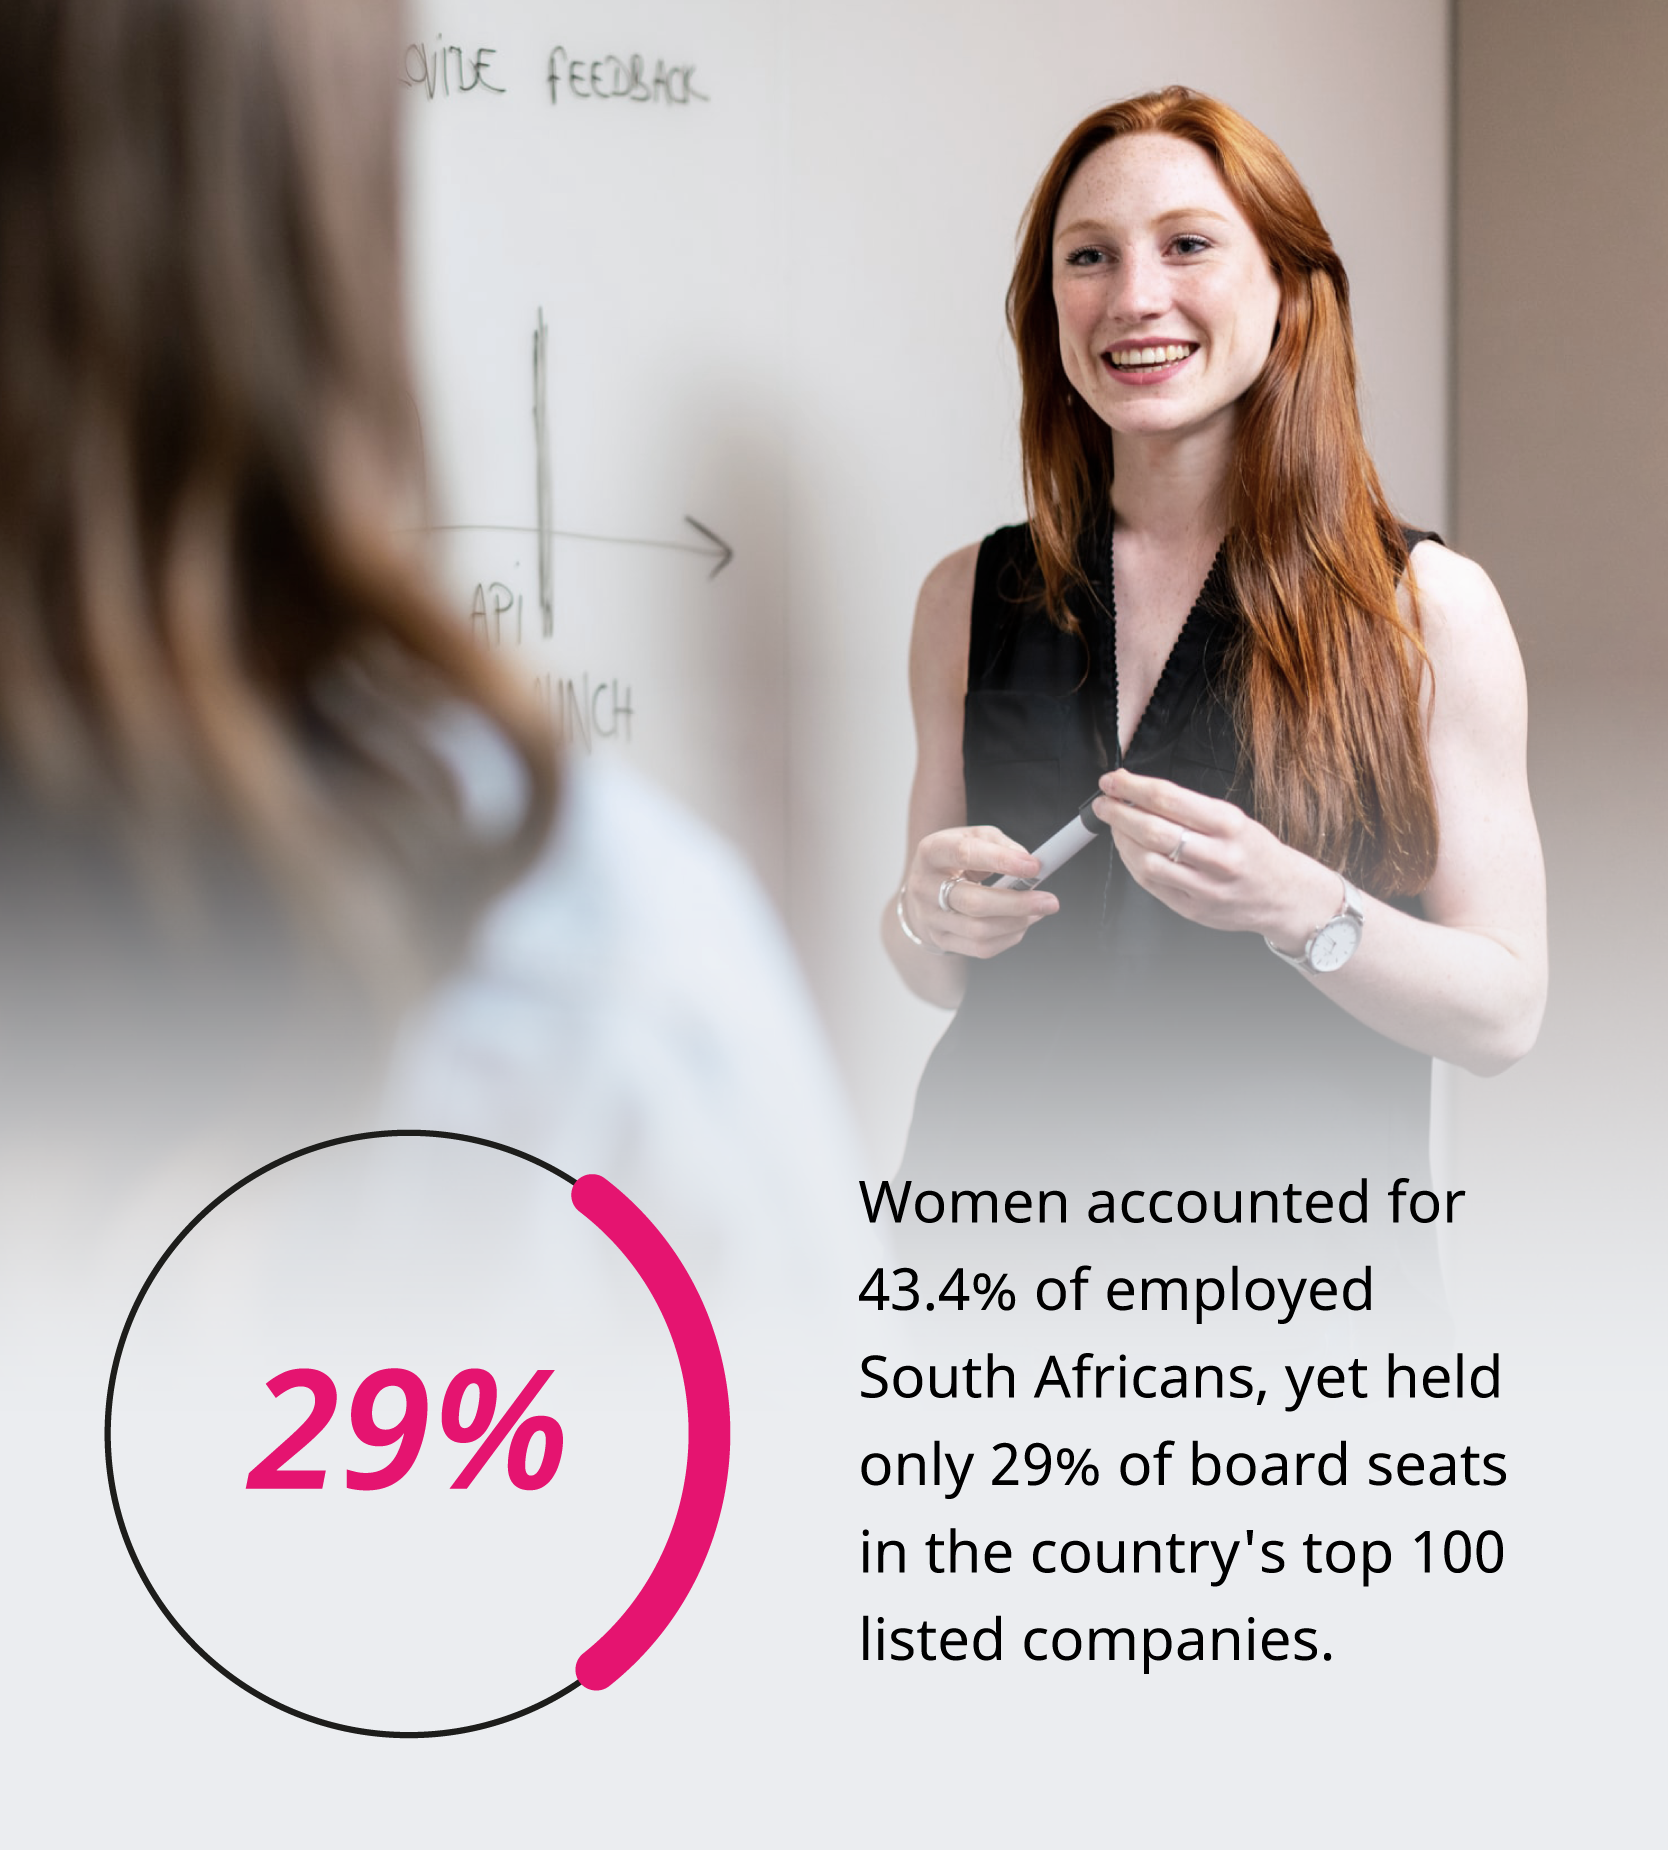 Two female leaders in the workplace. Women accounted for 43.4 percent of employed South Africans in the second quarter of 2021, but they held only 29 percent of board seats in the country’s top 100 listed companies.